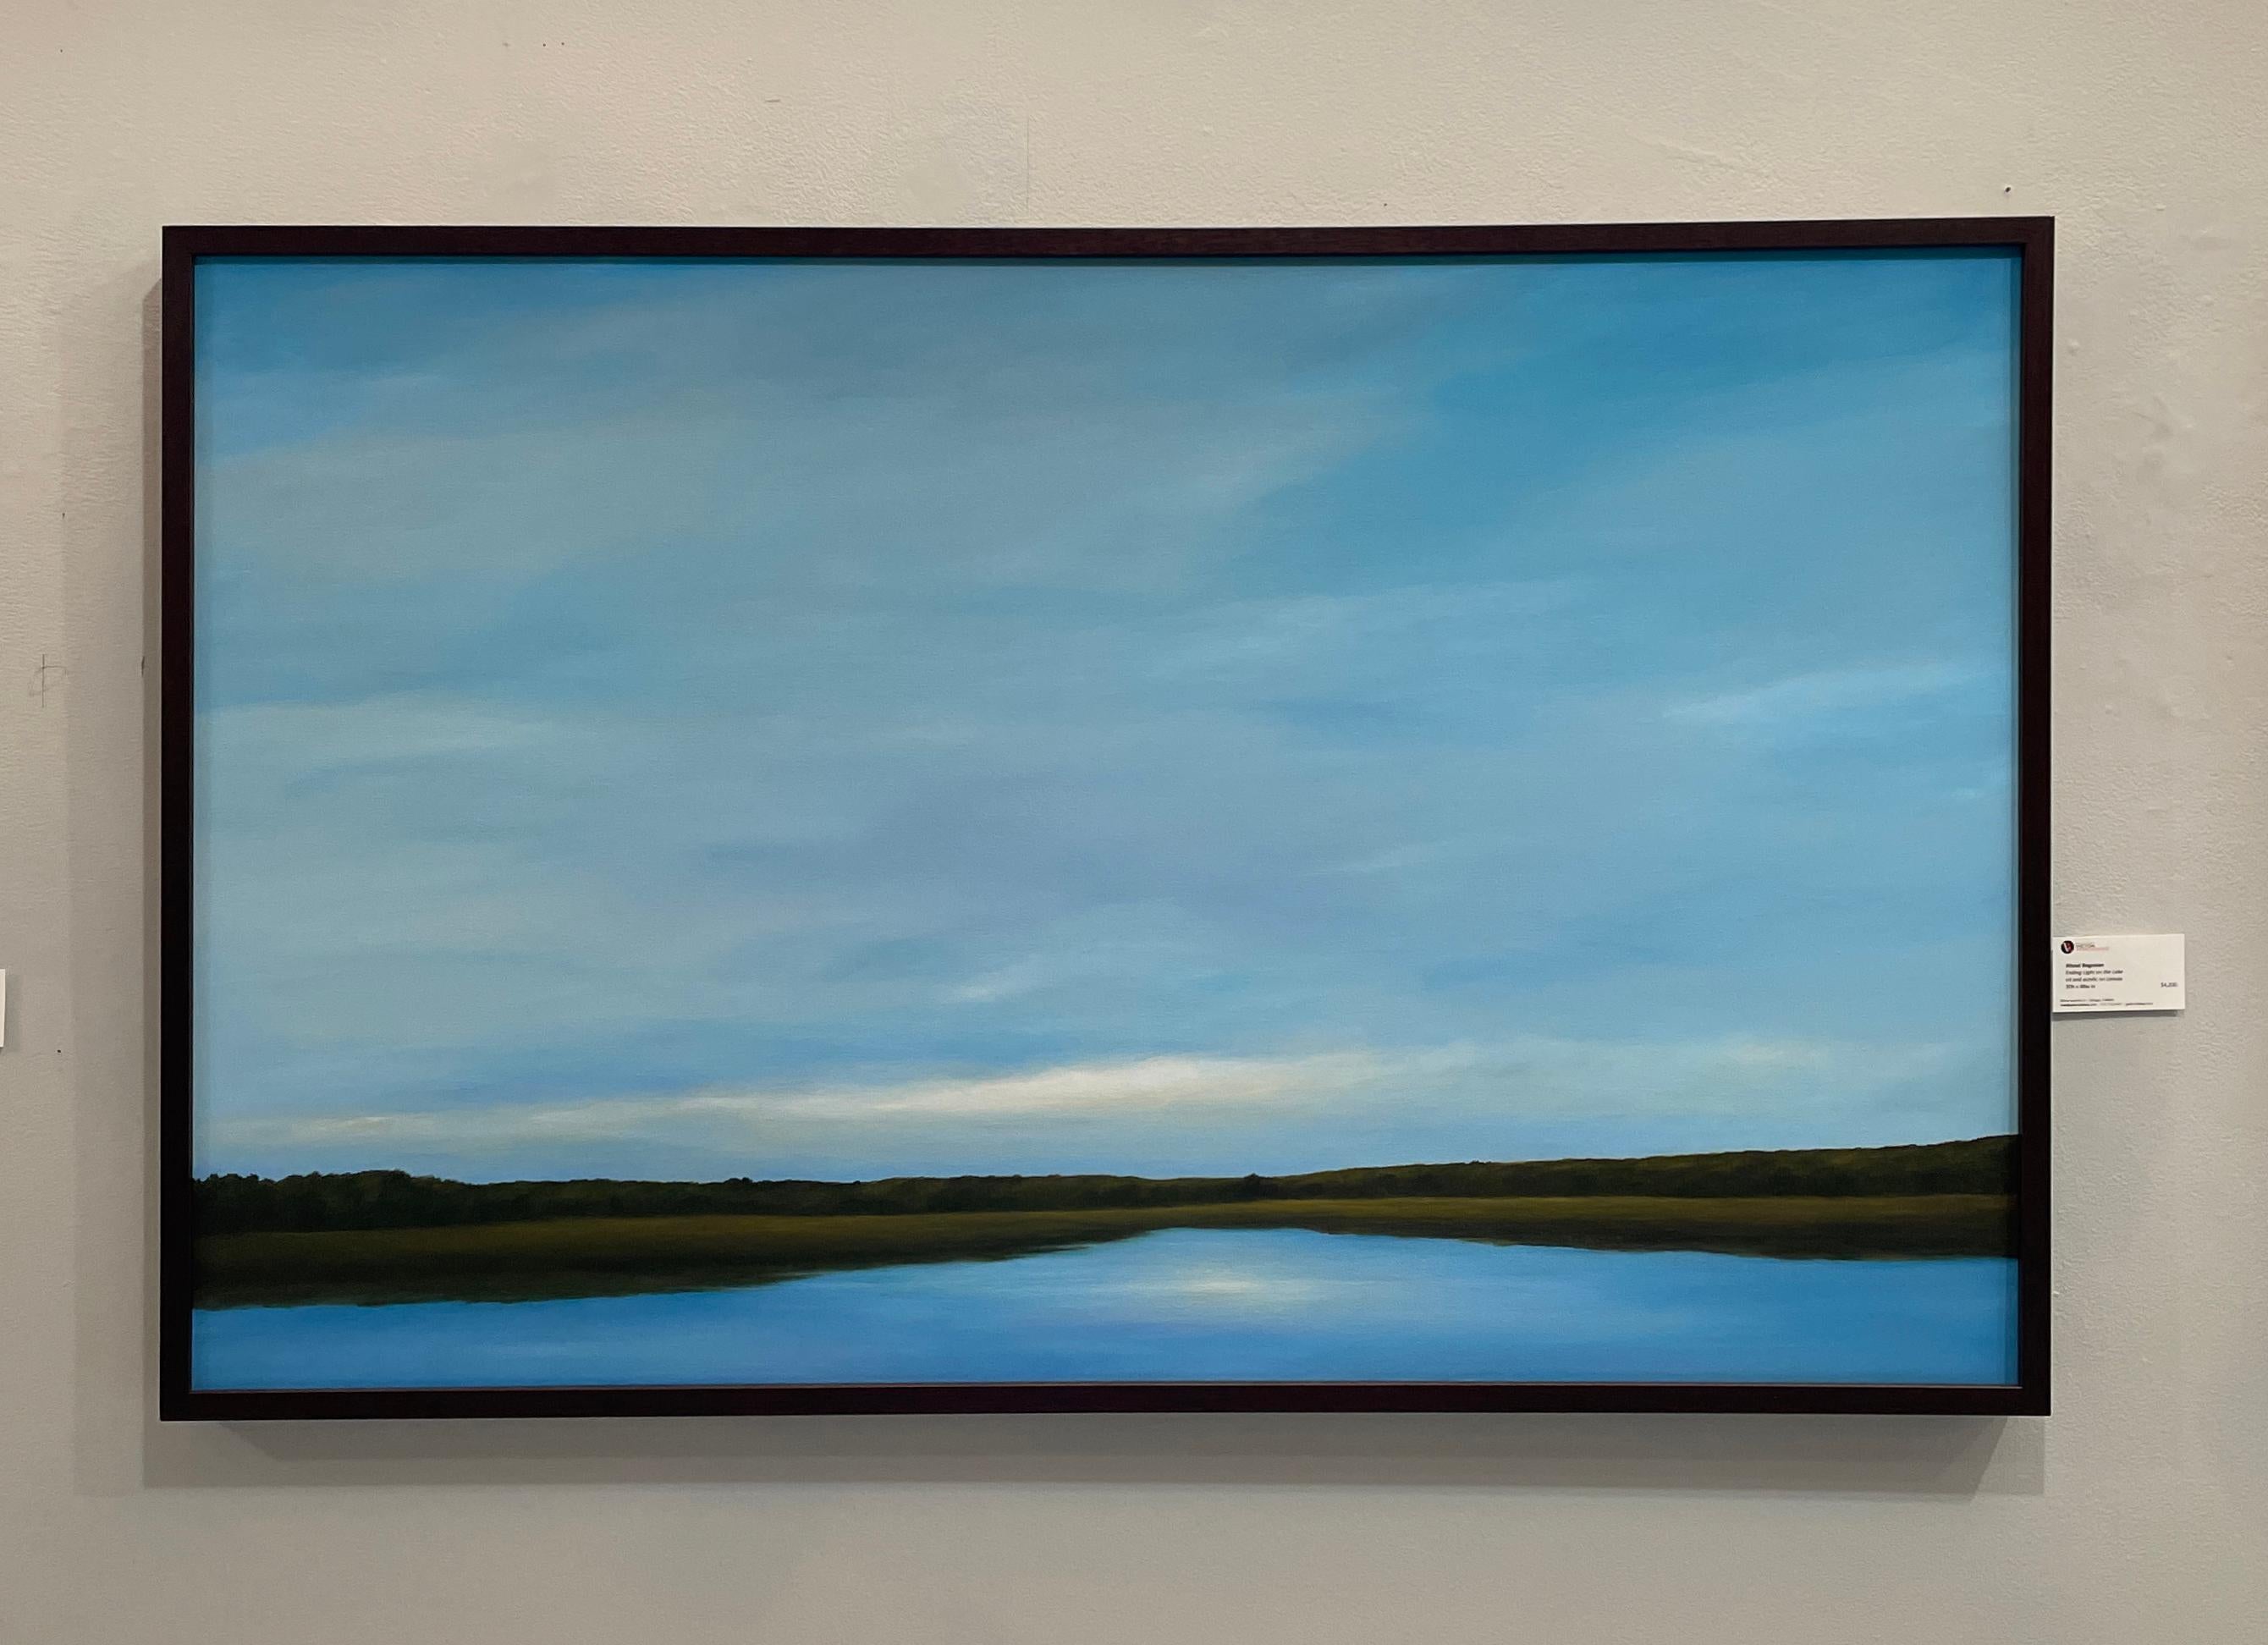 Ending Light on the Lake - Serene Landscape, Expansive Cloudy Sky with Calm Lake - Painting by Ahzad Bogosian